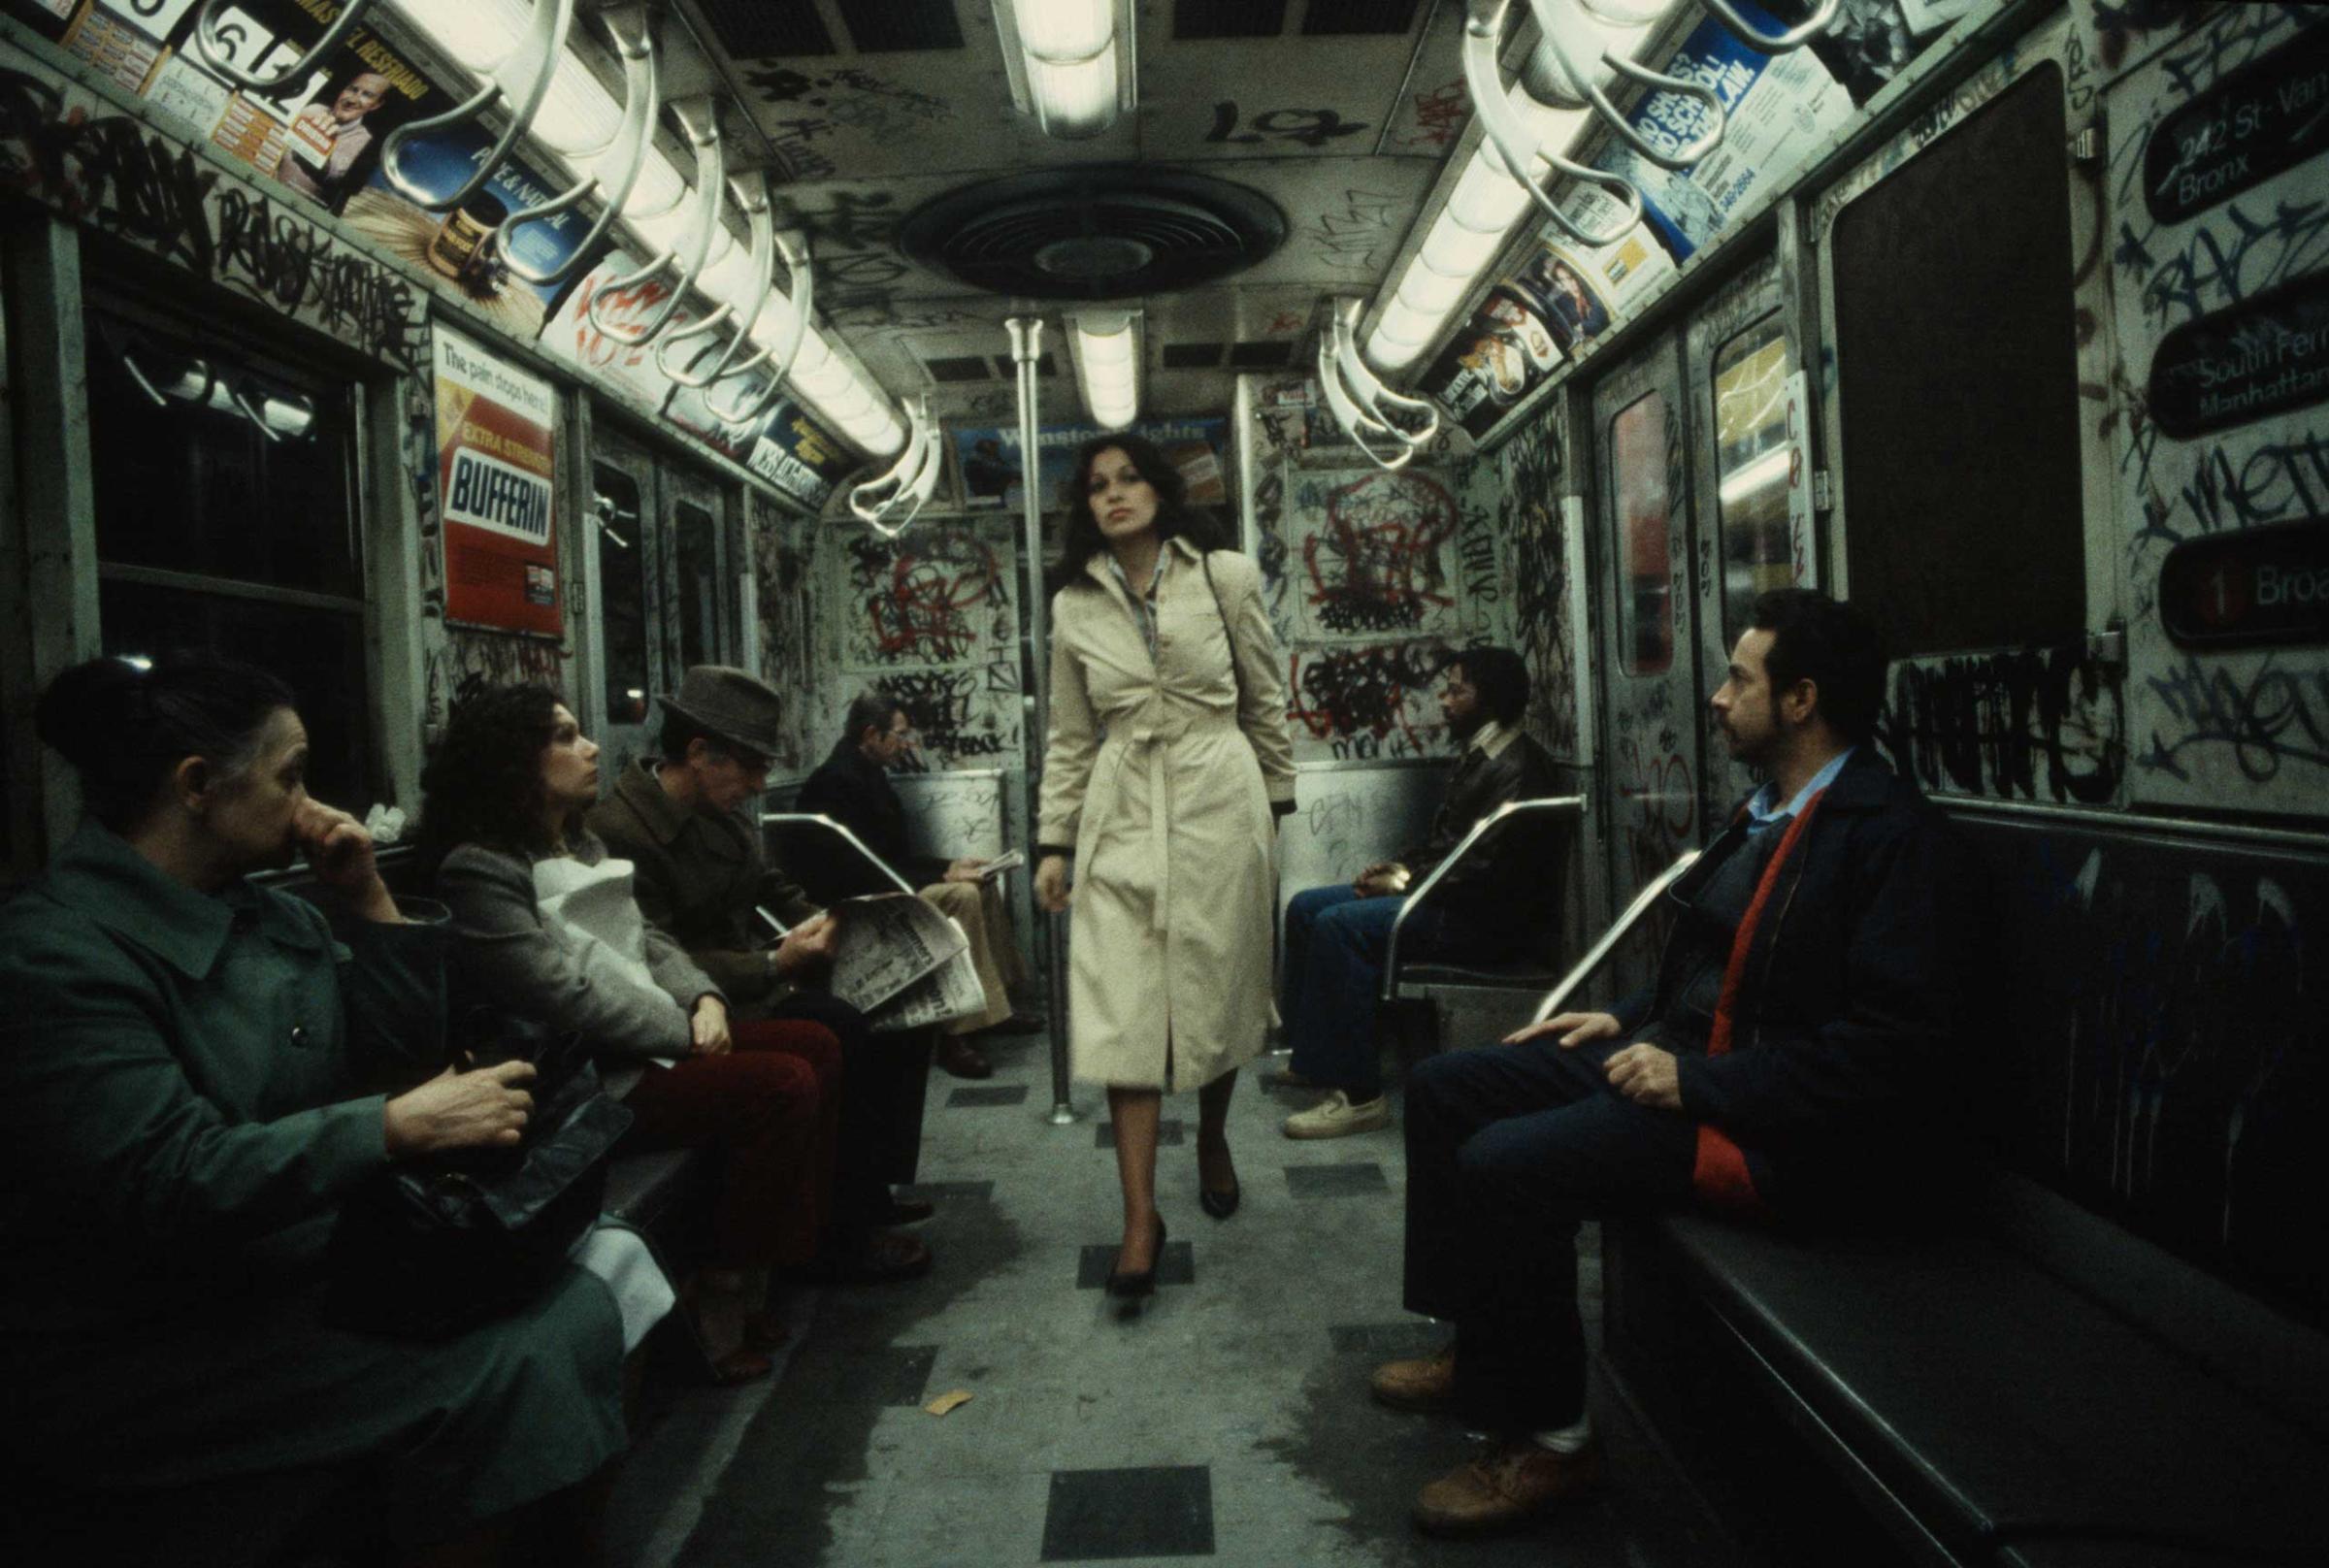 The following previously unpublished photos were taken by Christopher Morris in 1981: A woman walks through a heavily graffitied subway car, 1981.